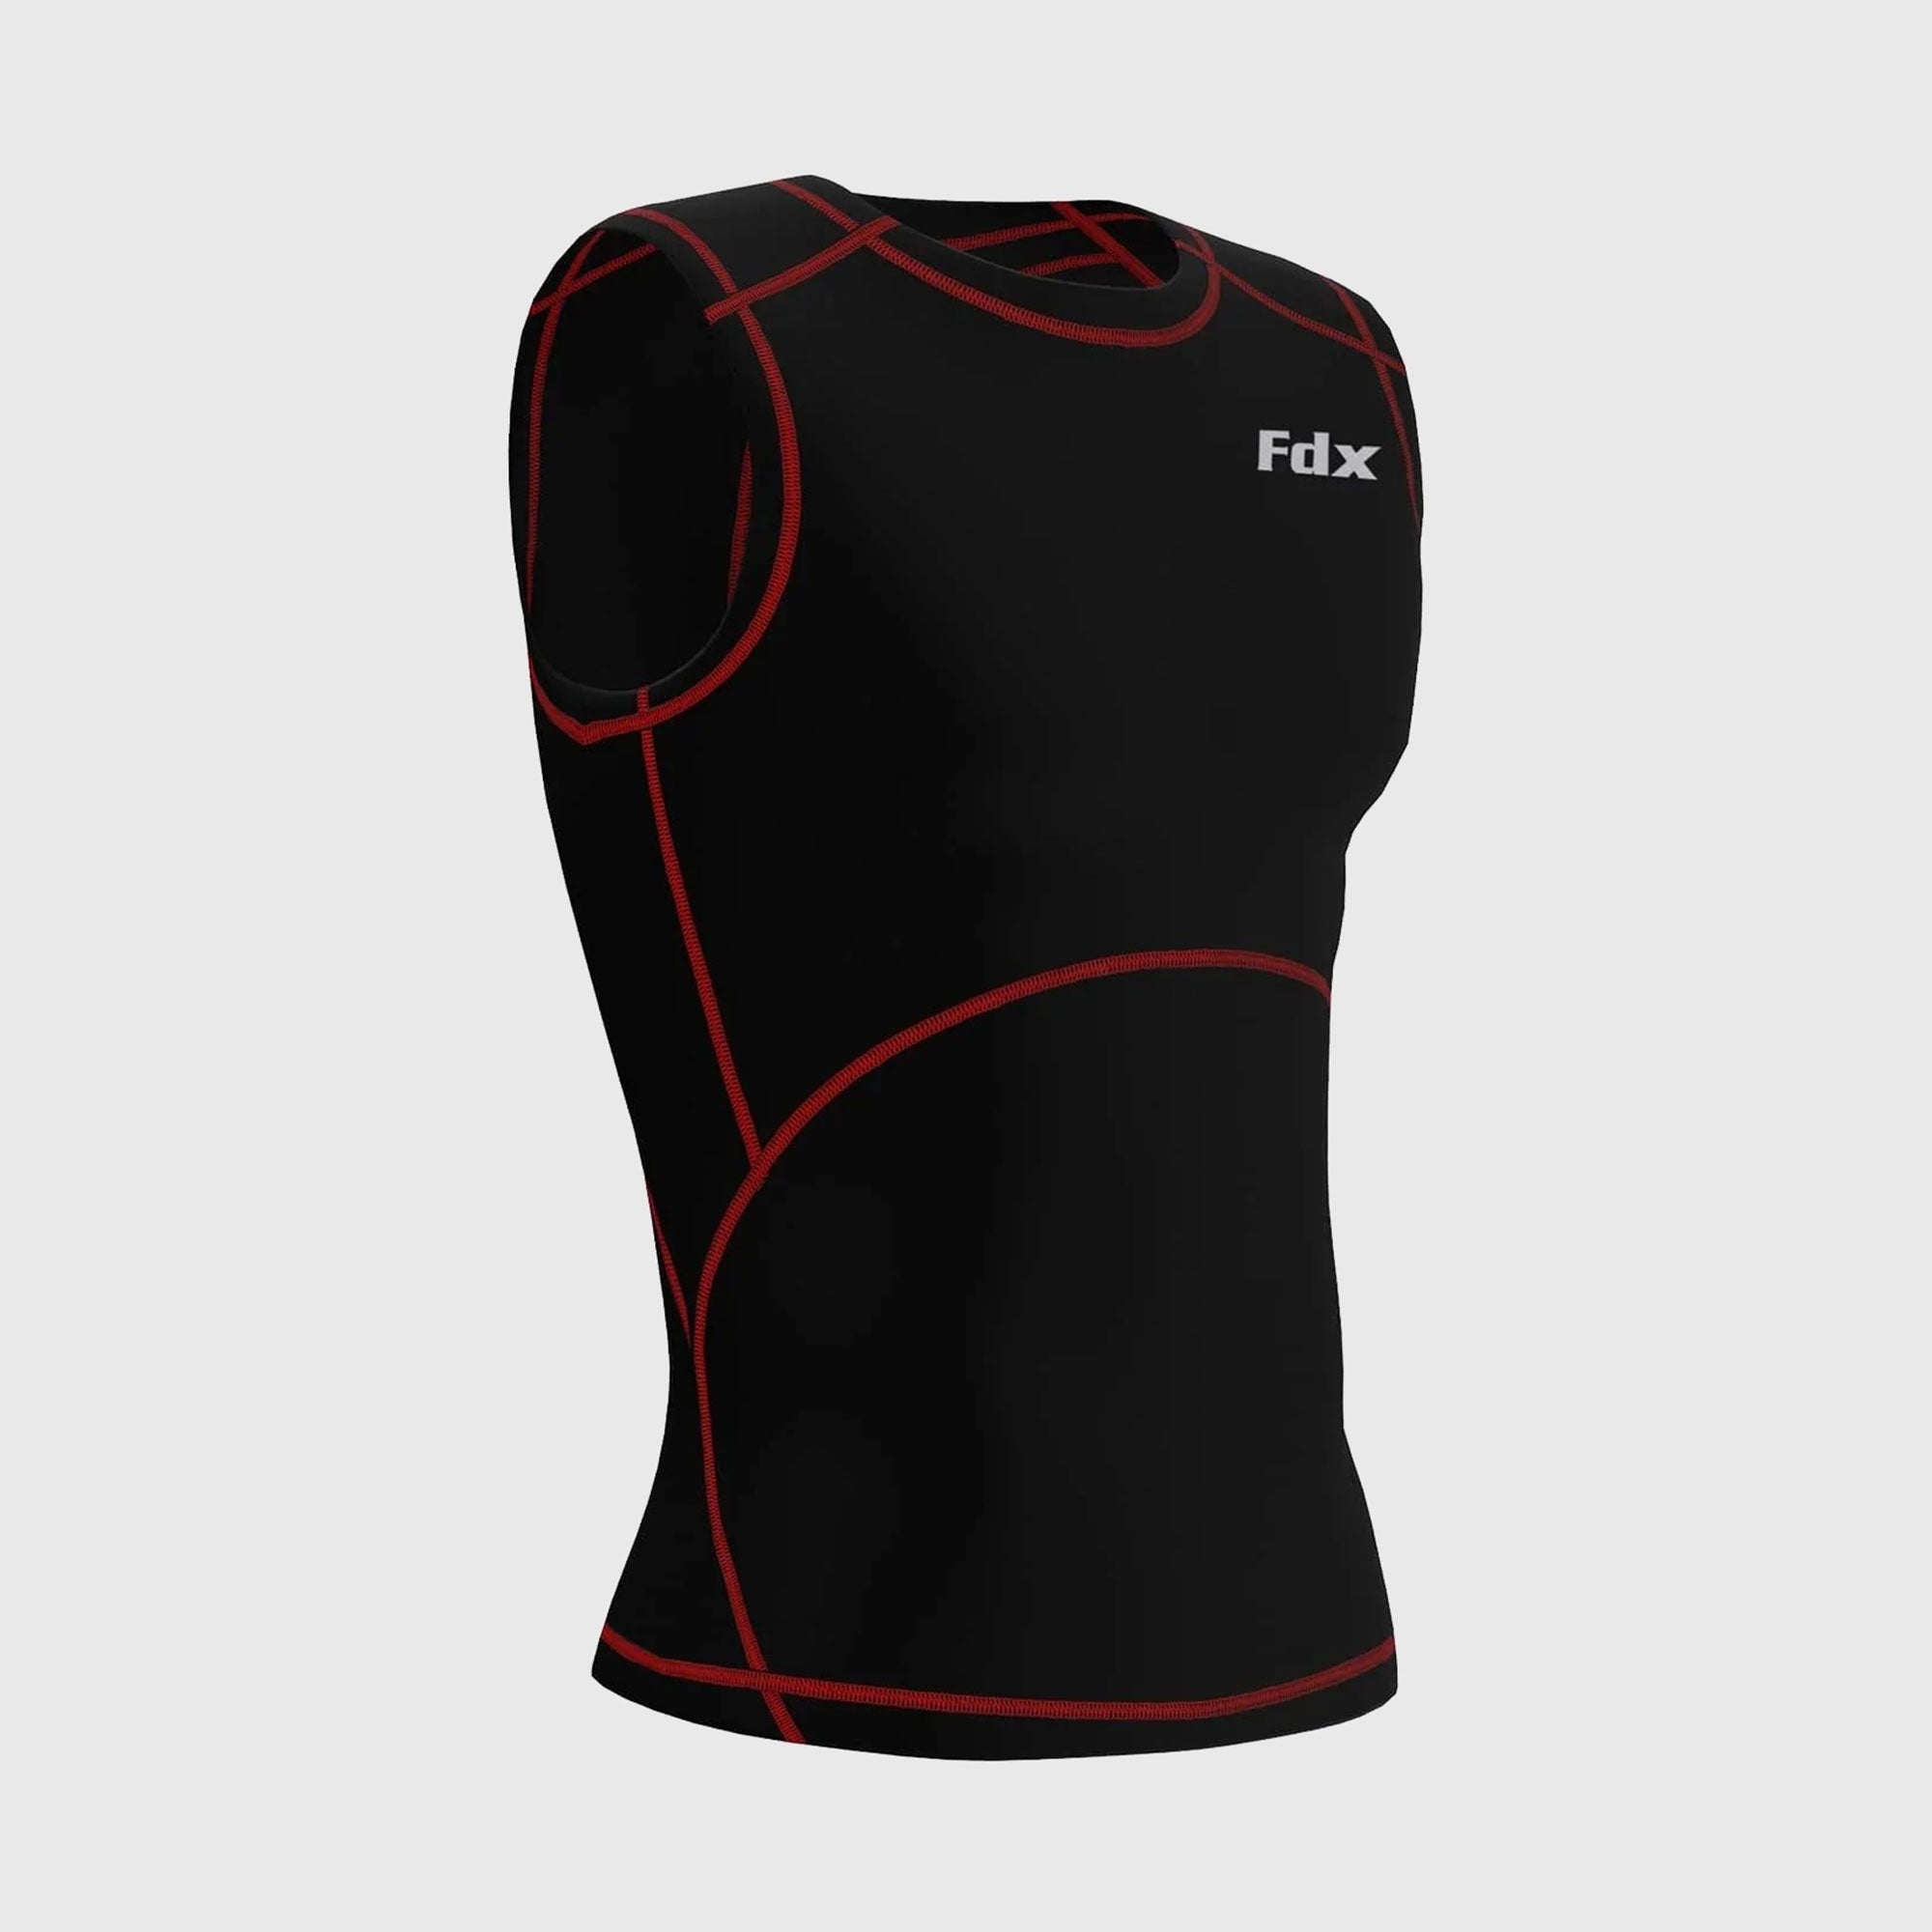 Fdx Men's Red Sleeveless Compression Top Running Gym Workout Wear Rash Guard Stretchable Breathable Base layer Shirt - Aeroform